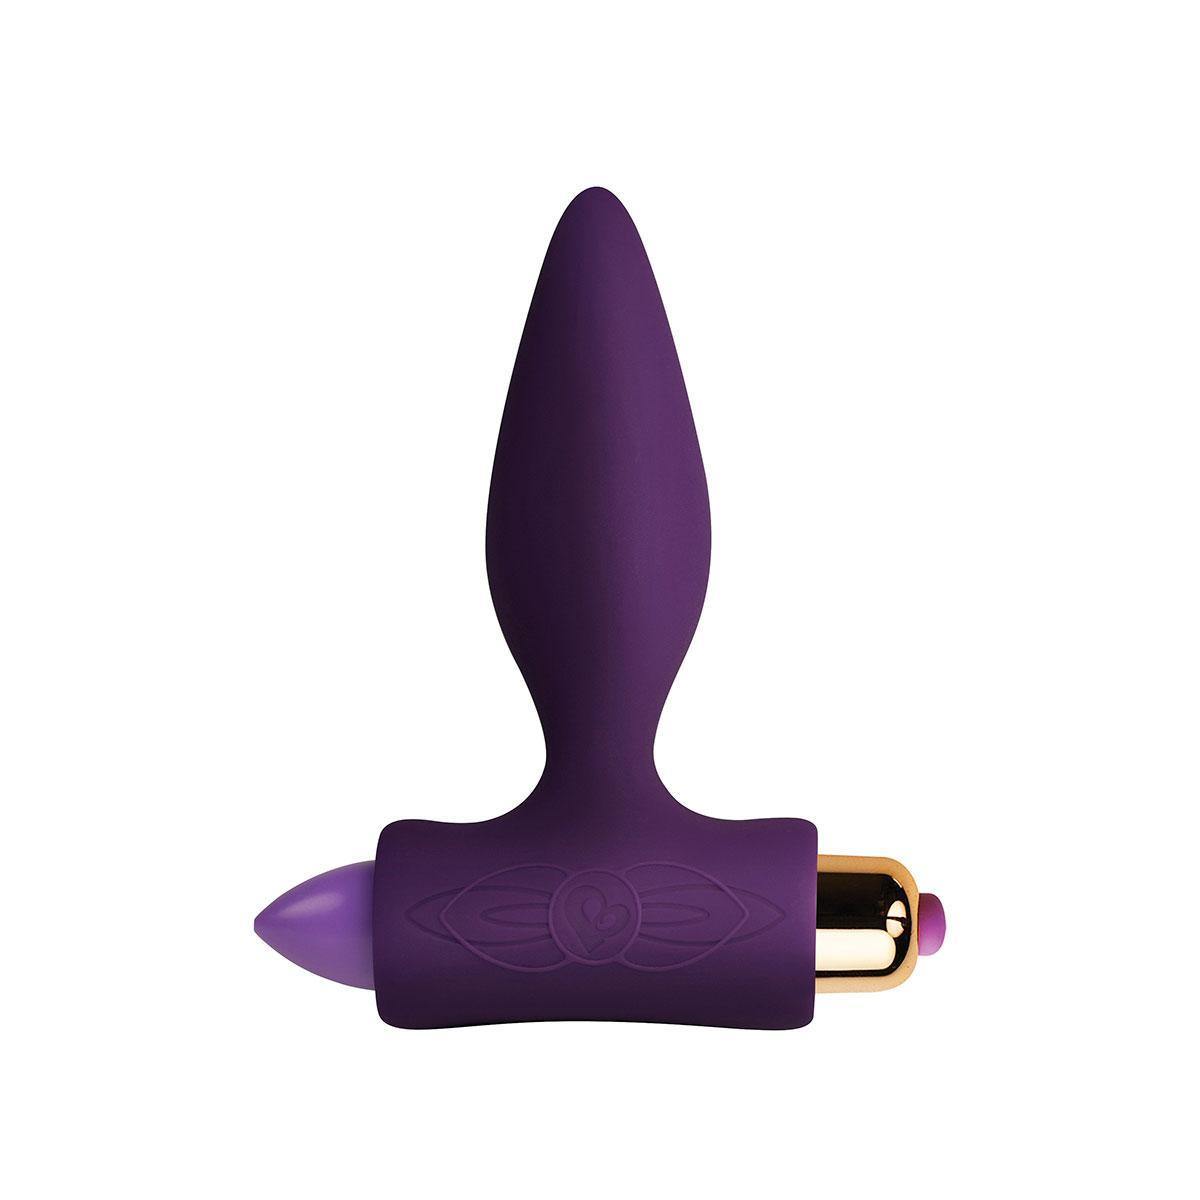 Rocks Off Petite Sensations Smooth Plug - Buy At Luxury Toy X - Free 3-Day Shipping